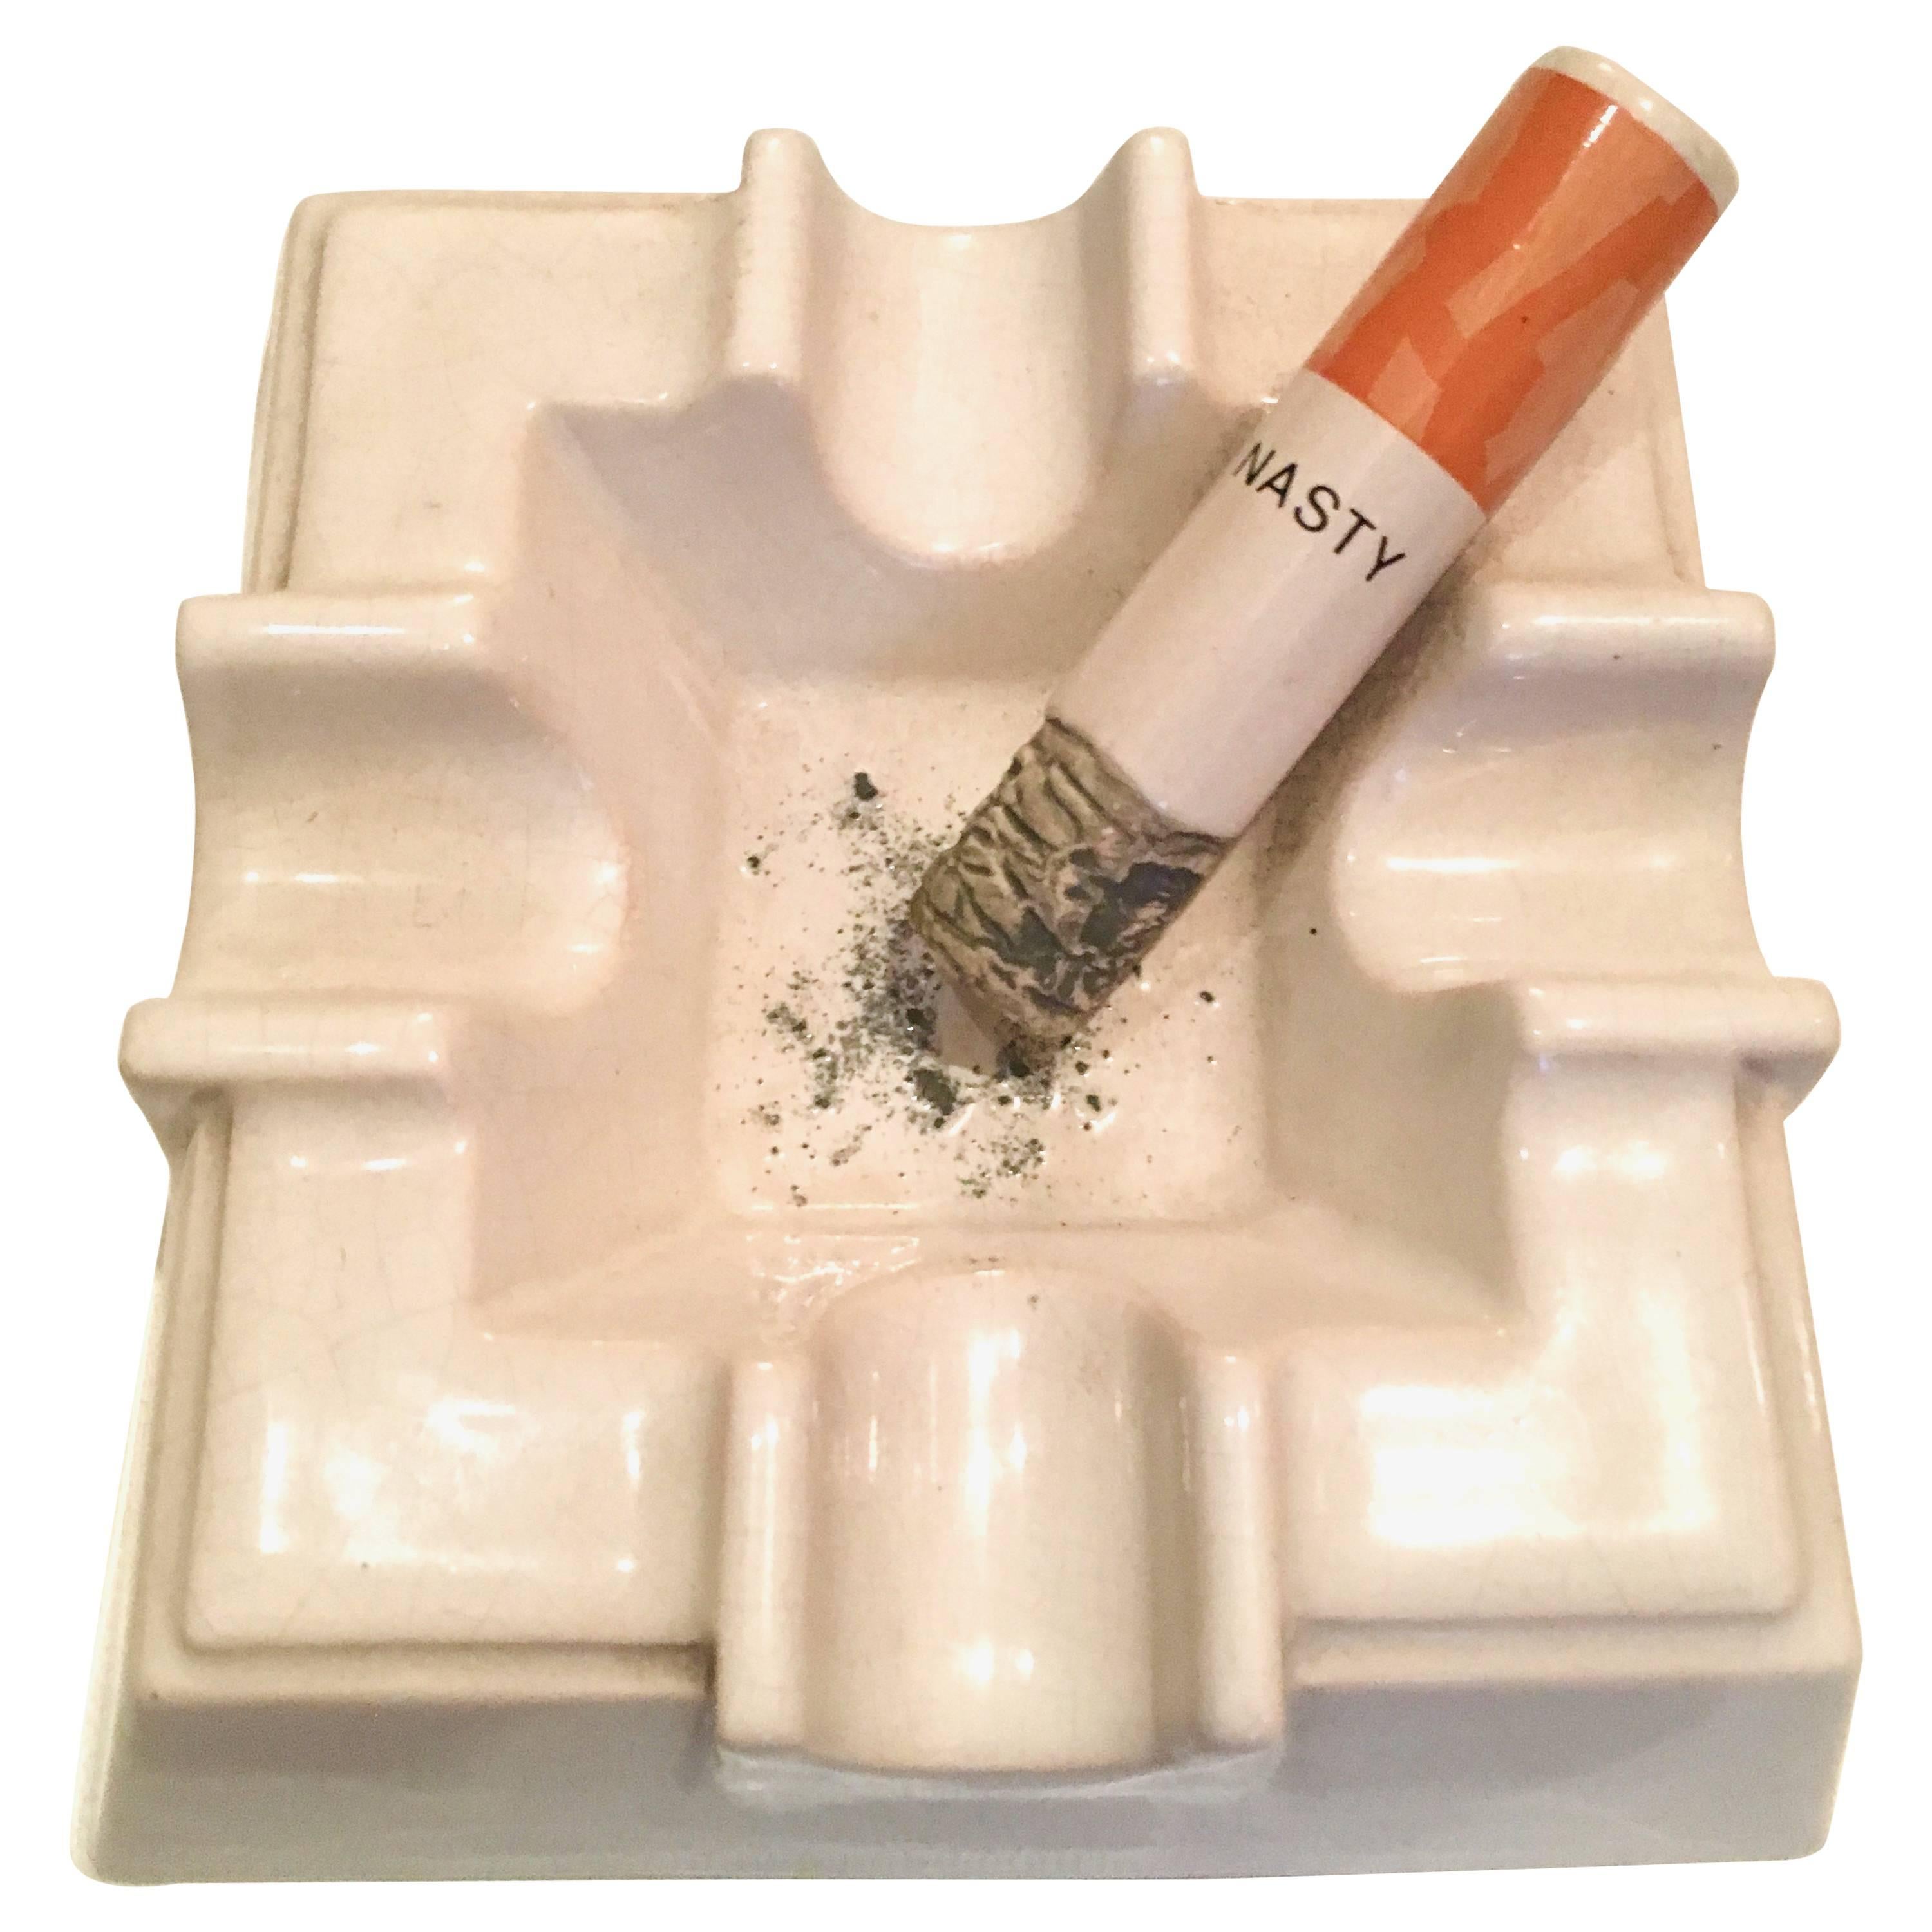 Sculptural Ceramic Ash Tray with "Nasty" Cigarette